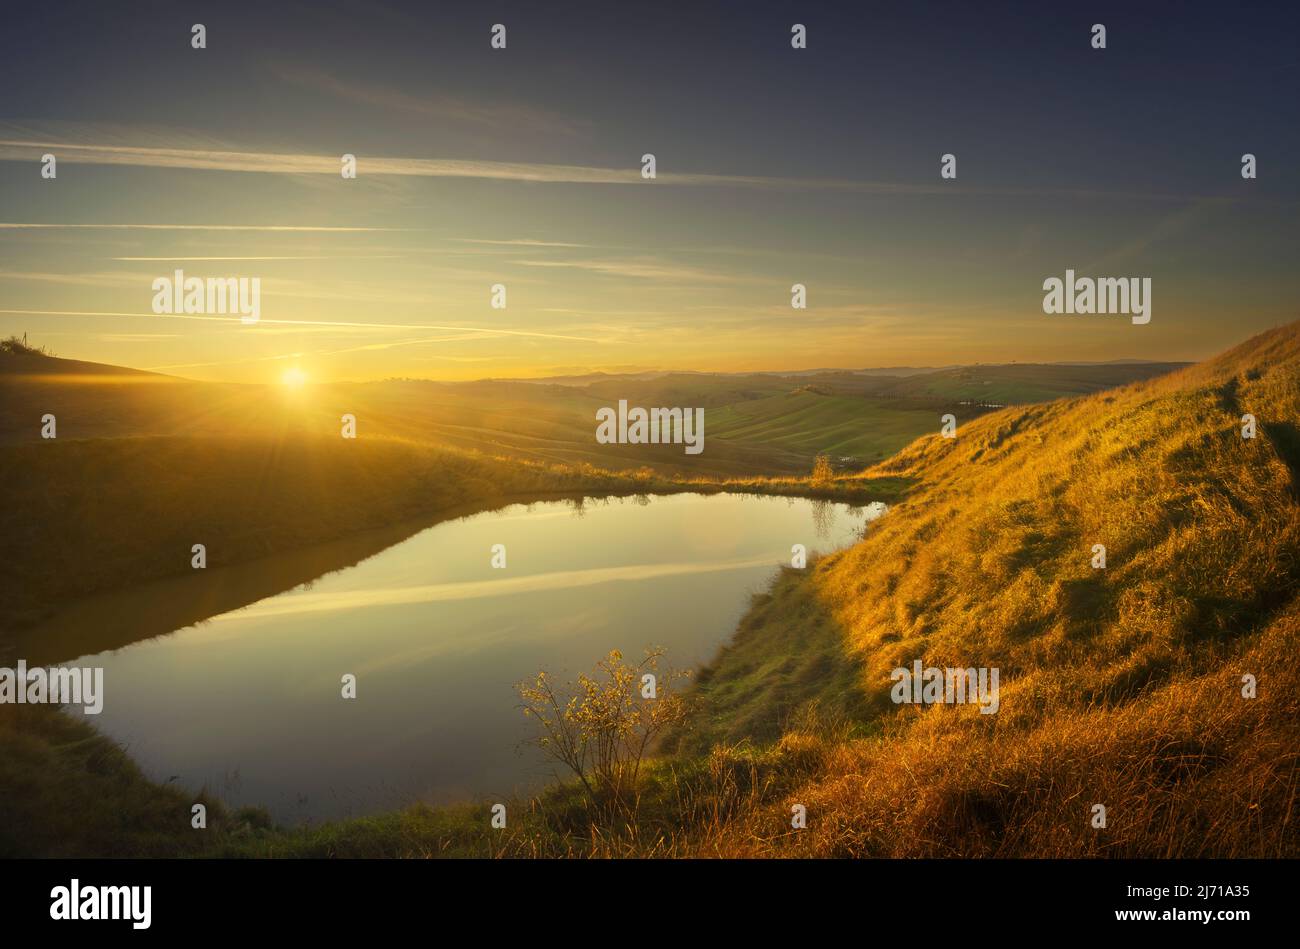 Small lake and rolling hills at sunset. Landscape in Crete Senesi, Asciano, Tuscany, Italy Stock Photo